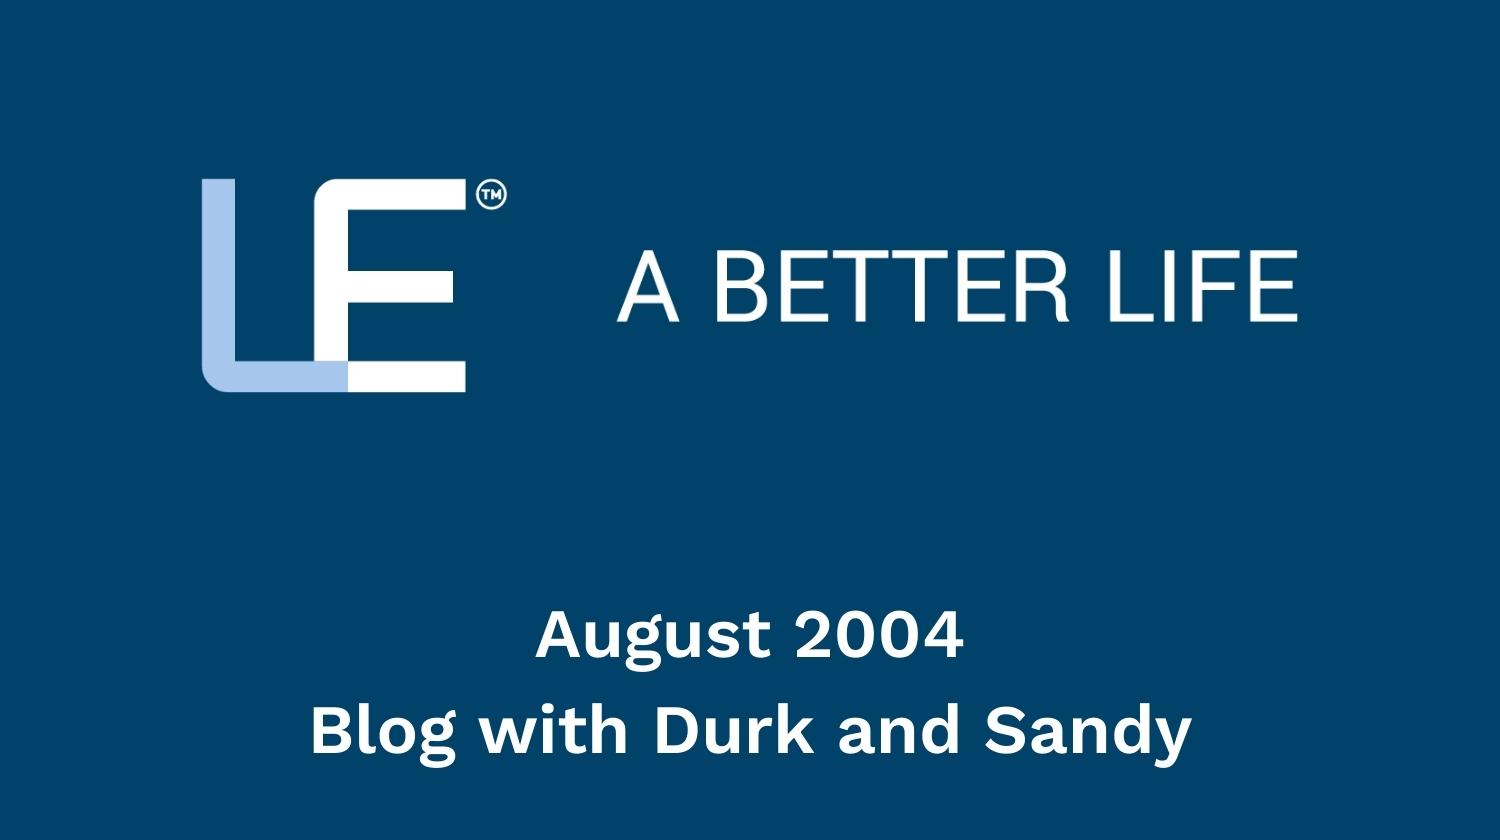 August 2004 Blog with Durk and Sandy